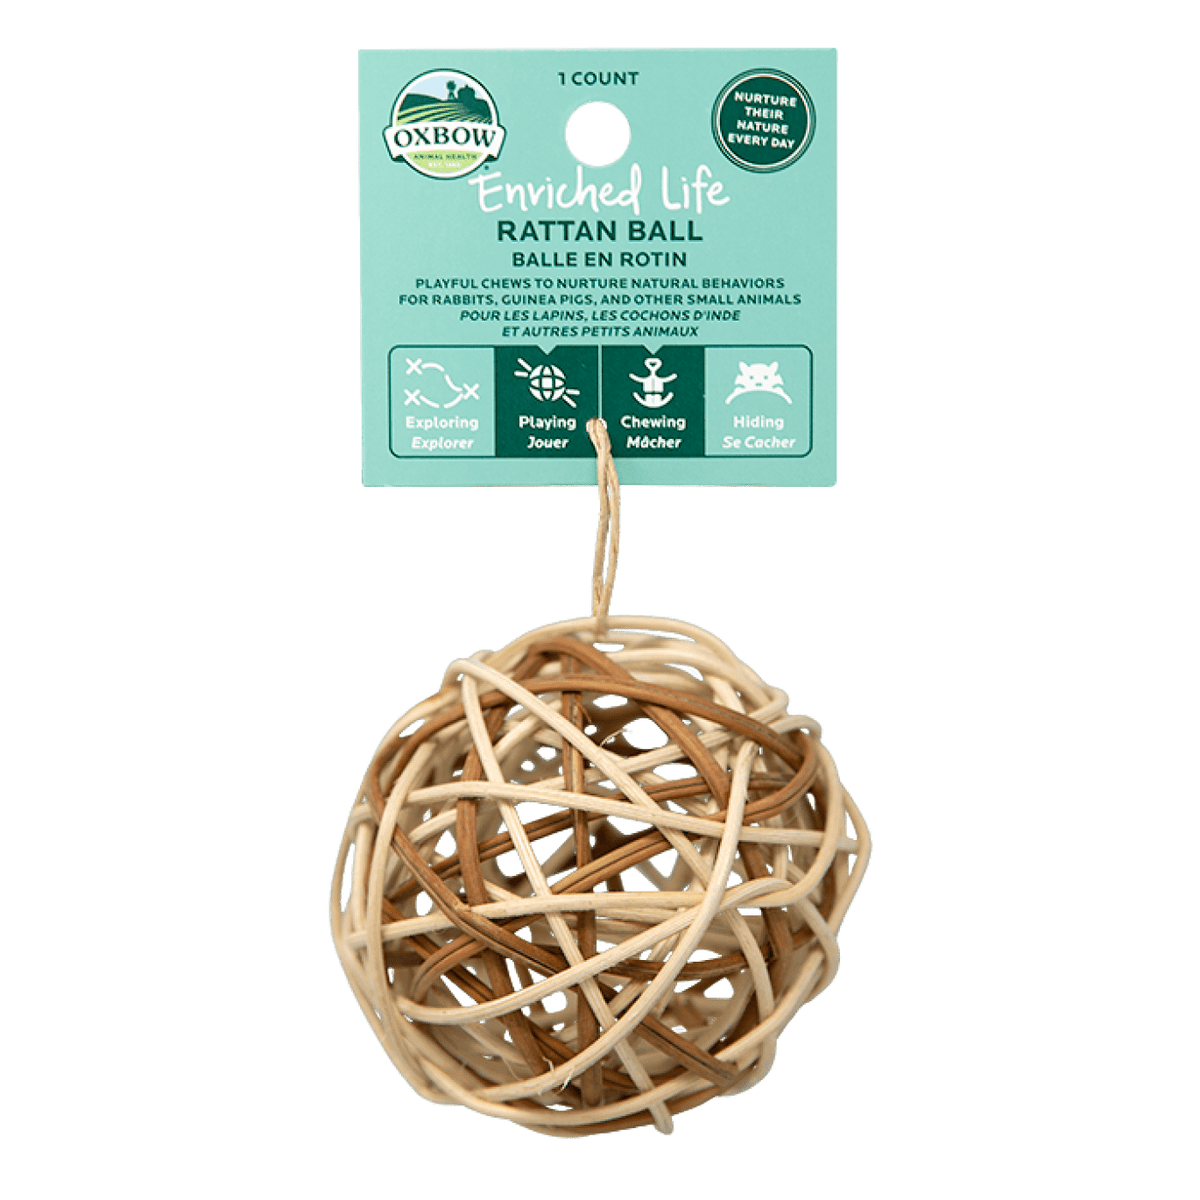 Oxbow Enriched Life Chew Toys - Rattan Ball